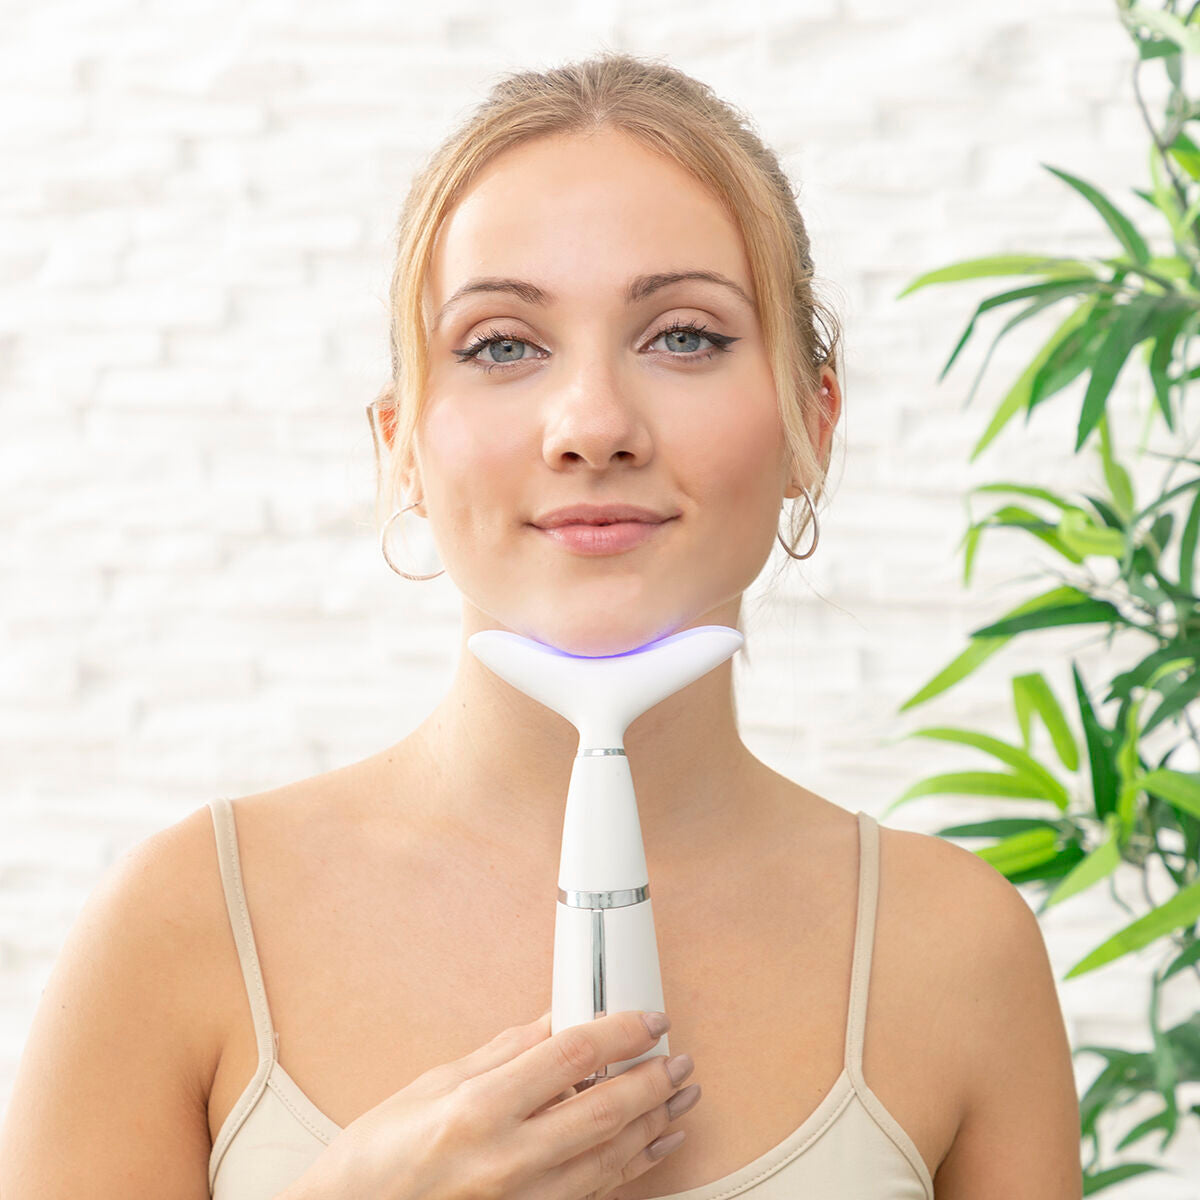 Jowl Reducer with Phototherapy, Thermotherapy and Vibration Kinred InnovaGoods